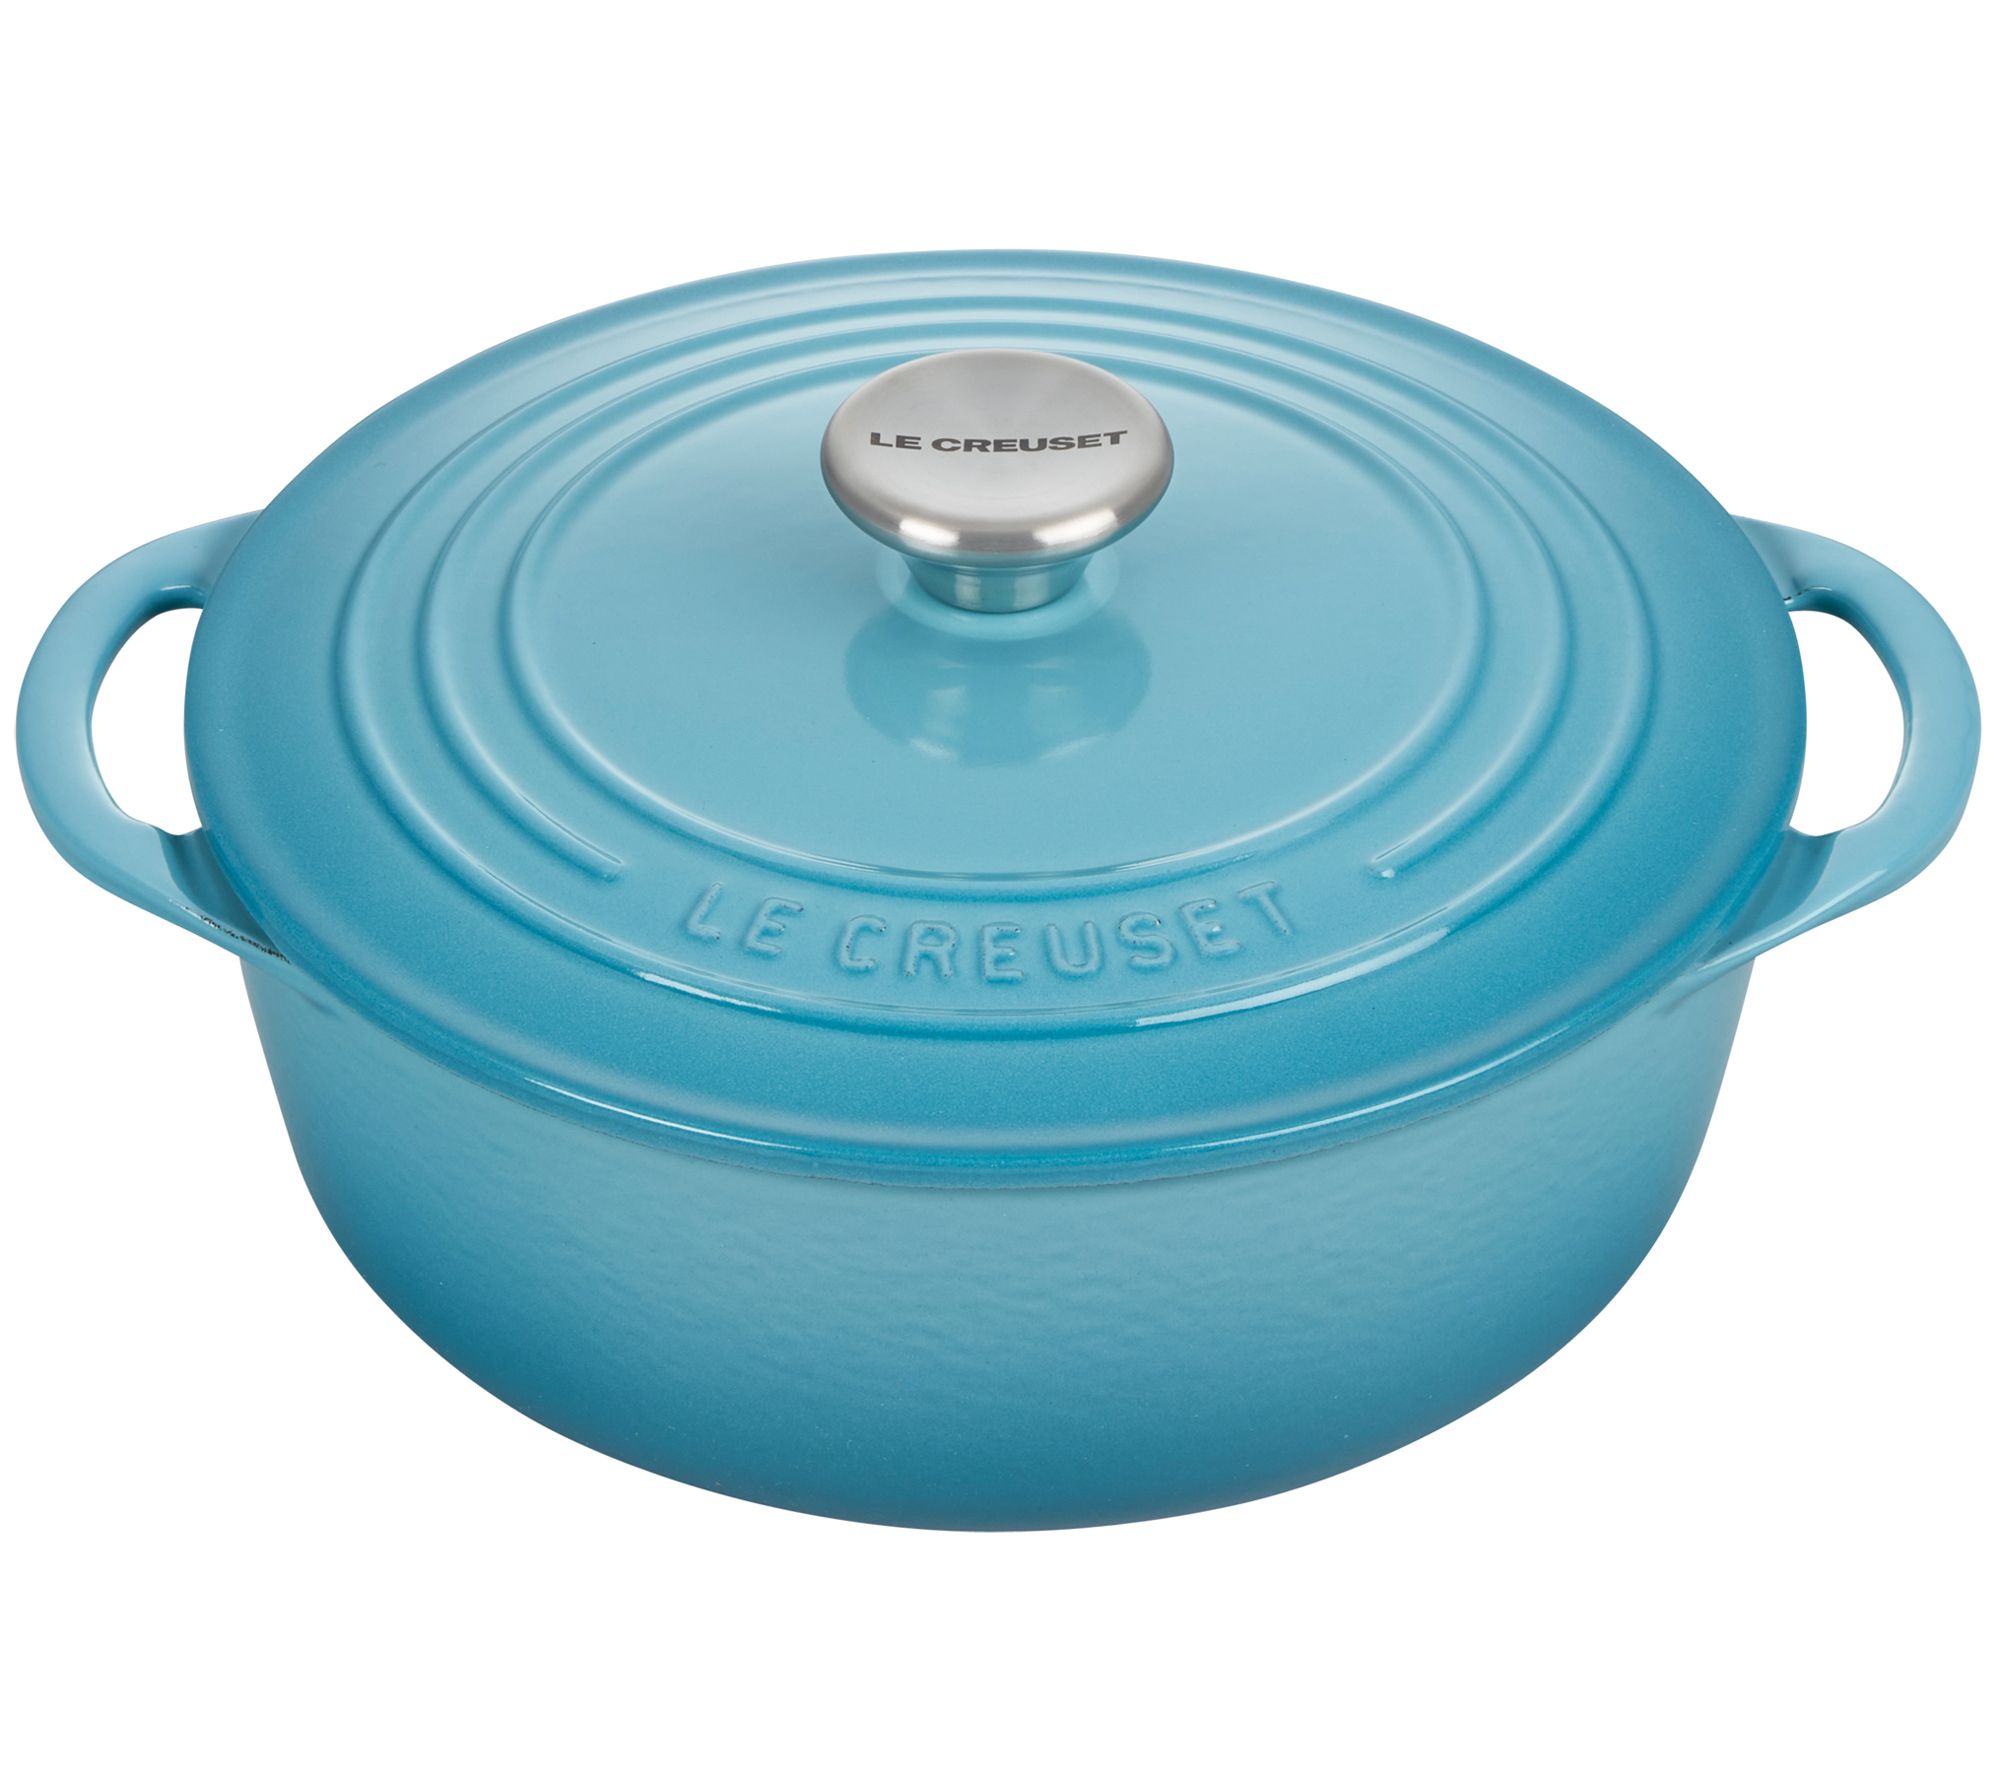 QVC sale: Save on KitchenAid, Caraway Home, Le Creuset, and more